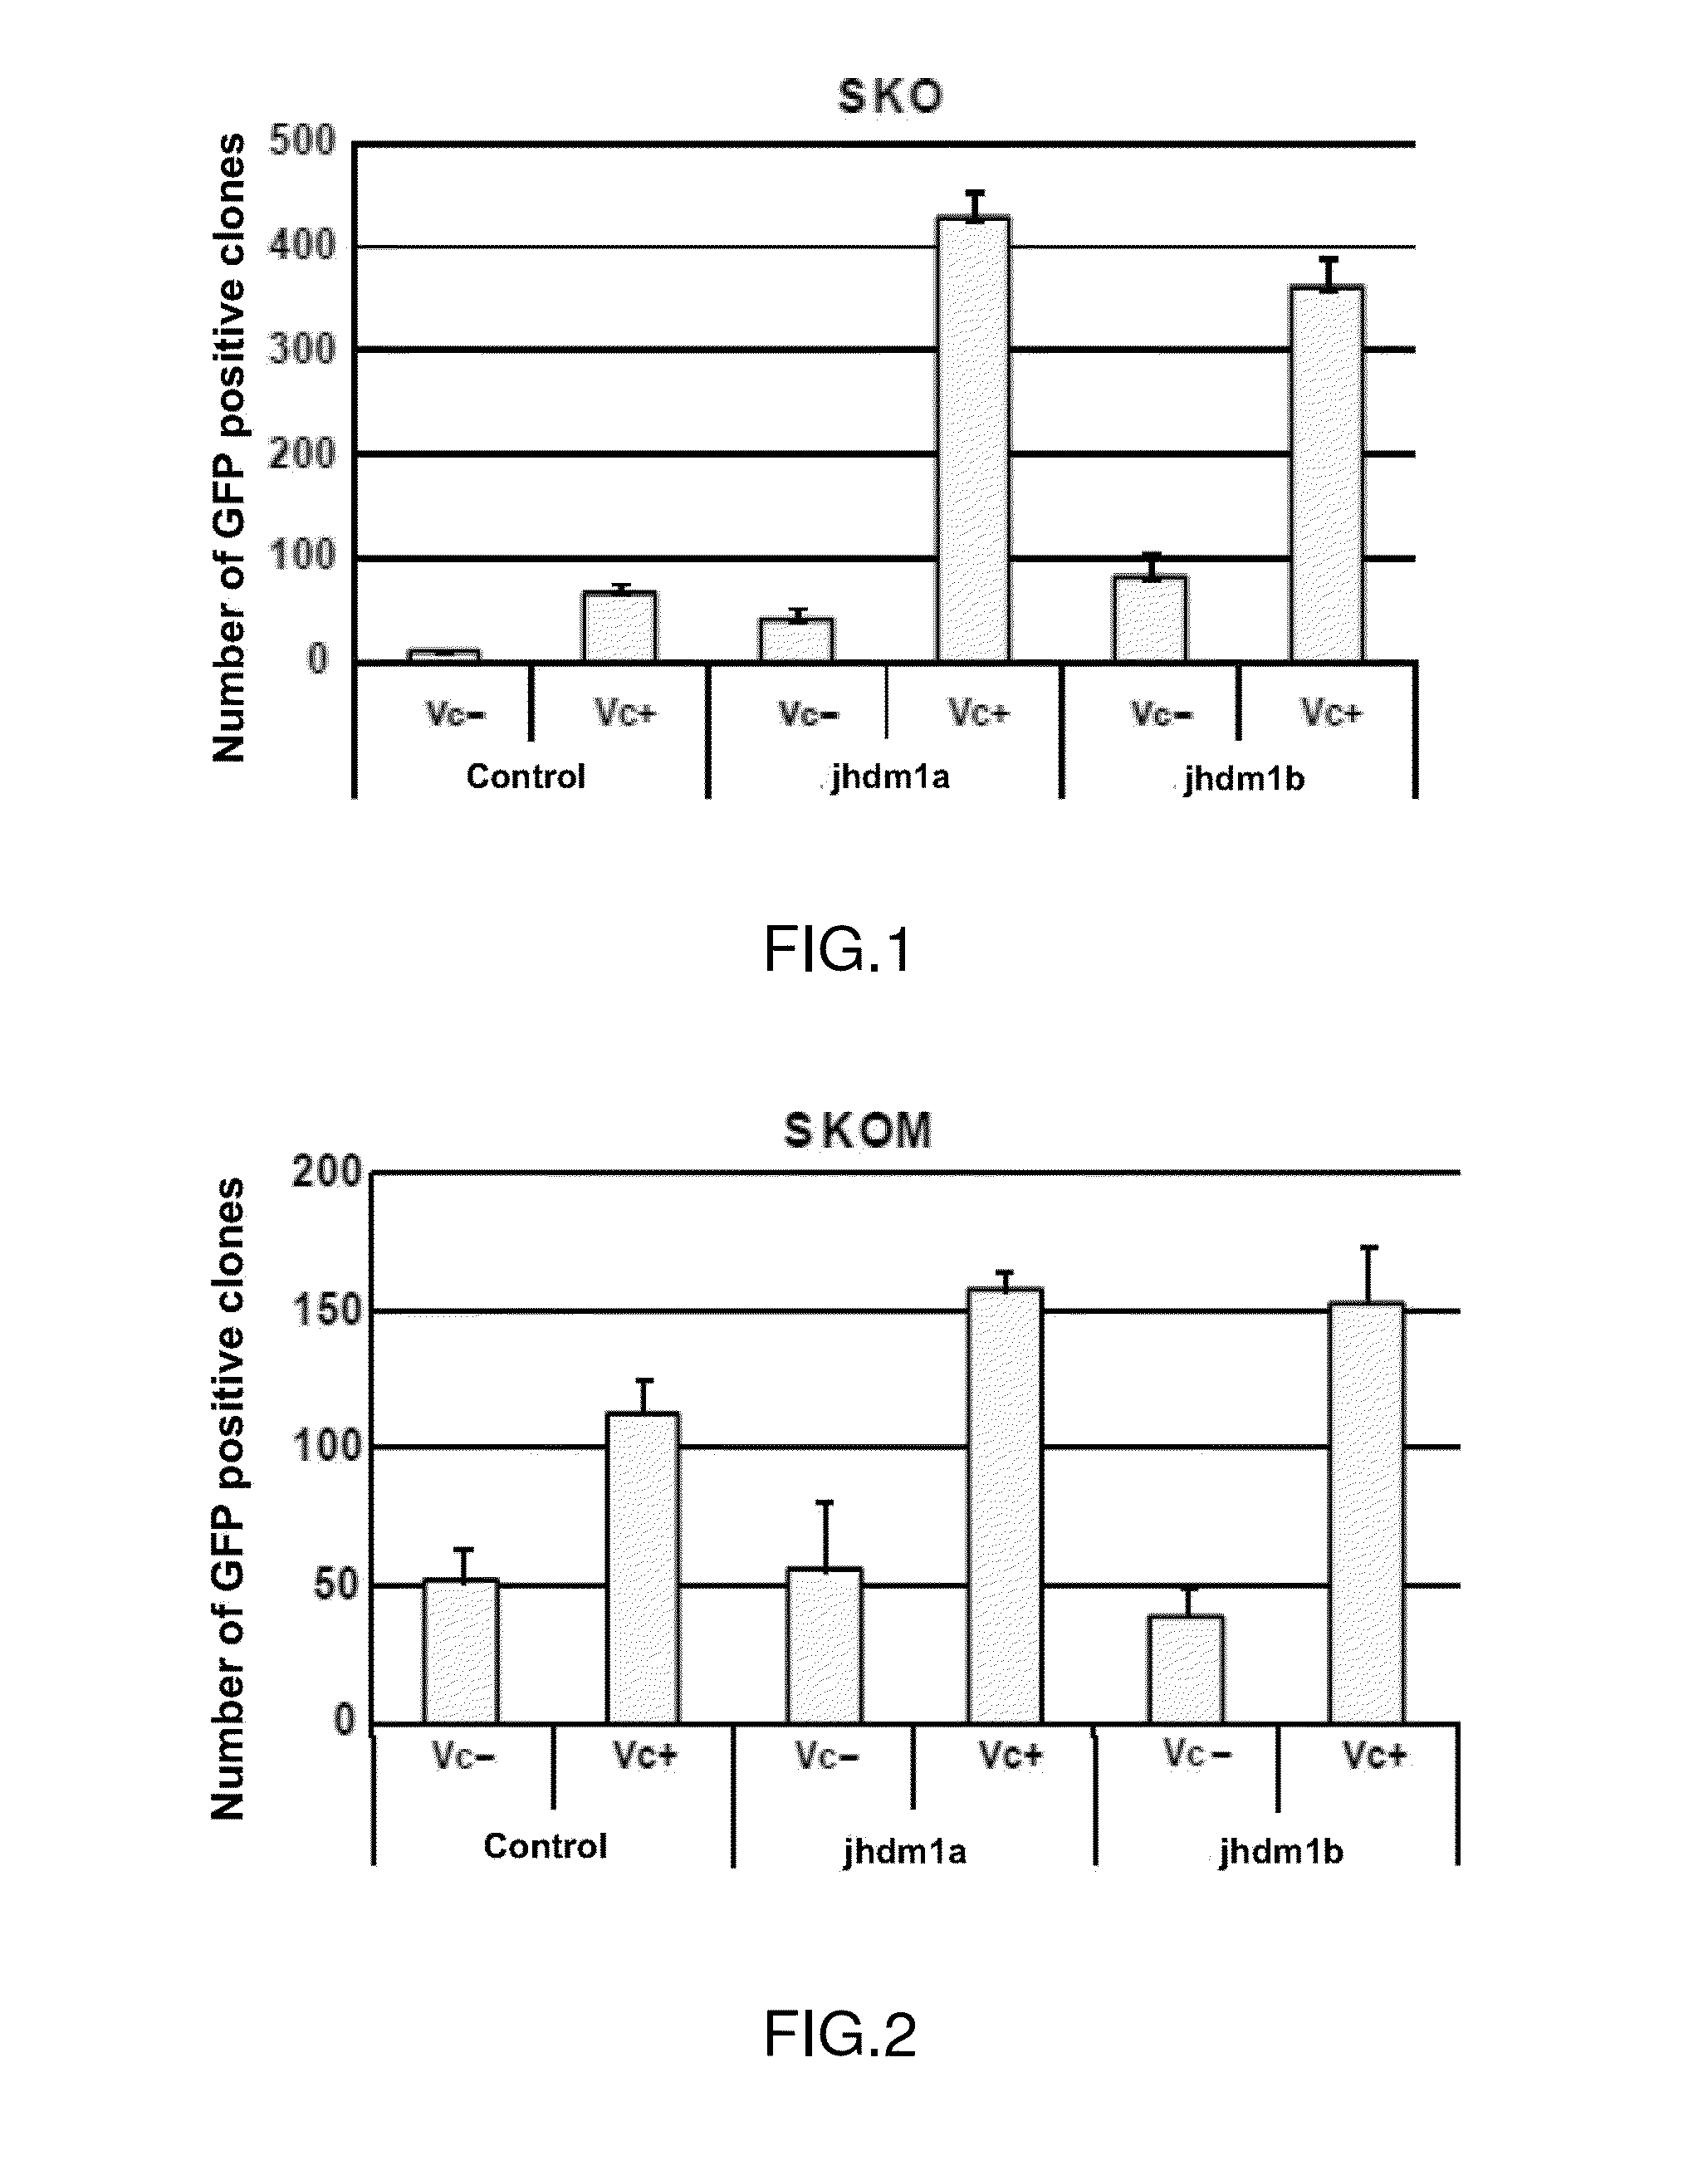 Method for increasing the efficiency of inducing pluripotent stem cells